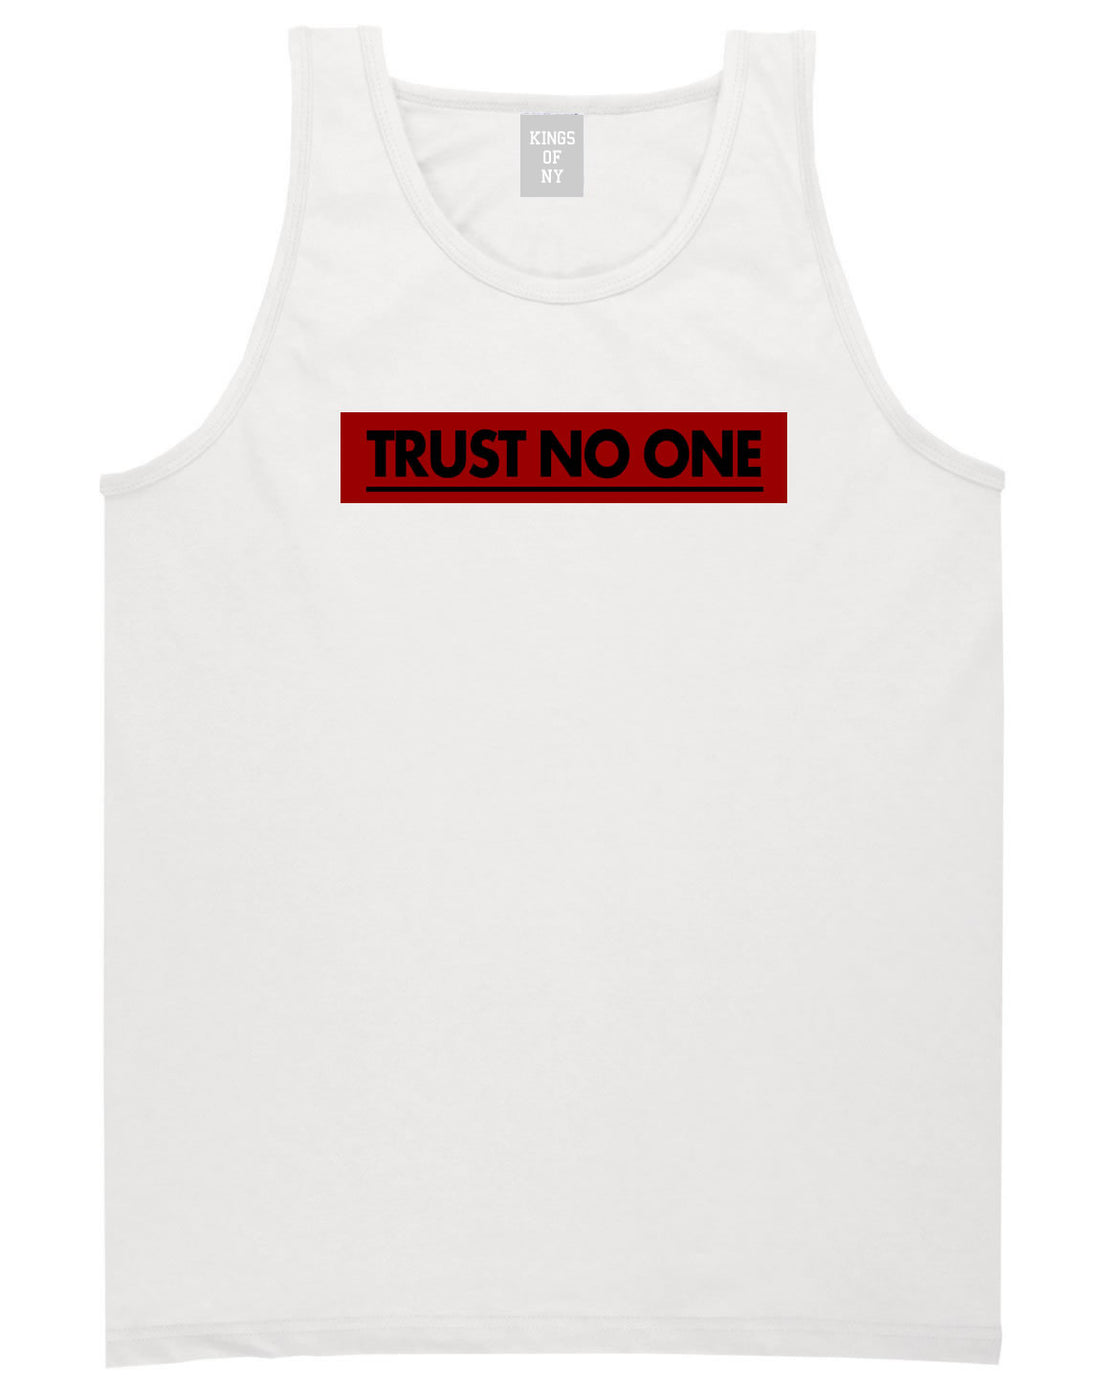 Trust No One Tank Top in White By Kings Of NY